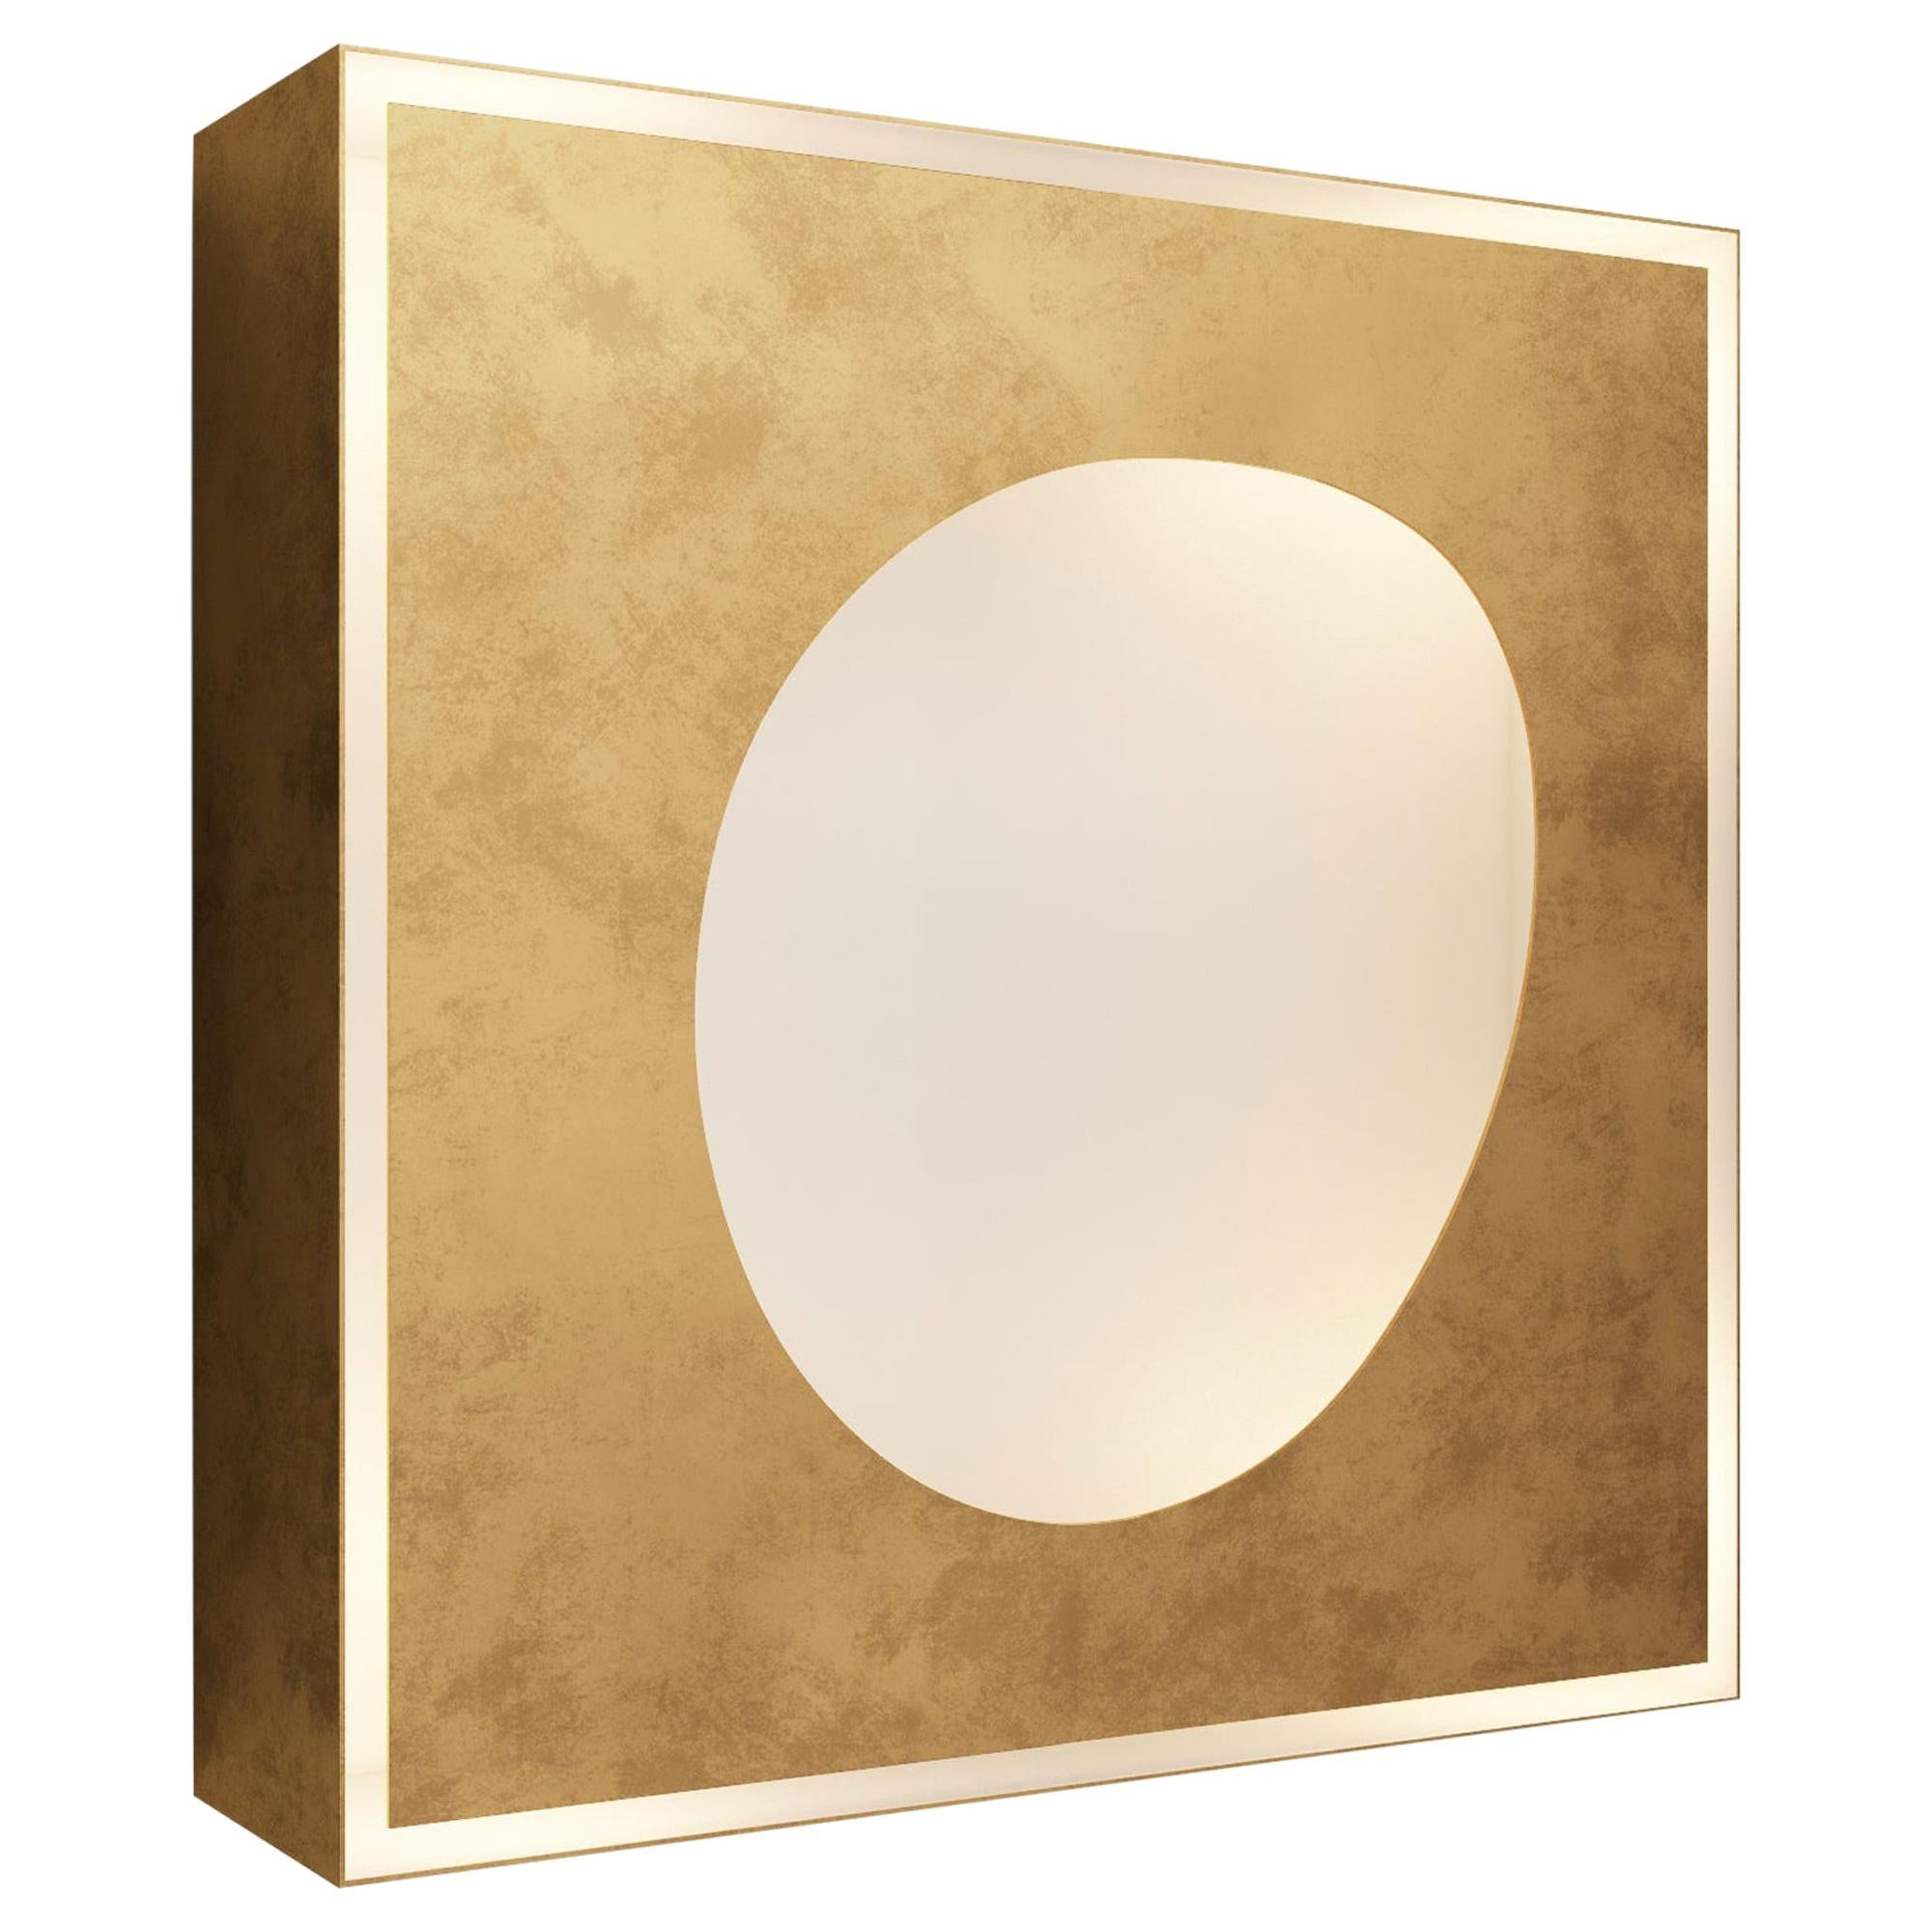 Wall Sconce FC01 Florencia Costa Light Bronzed Brass Italy 2020 Limited Edition For Sale